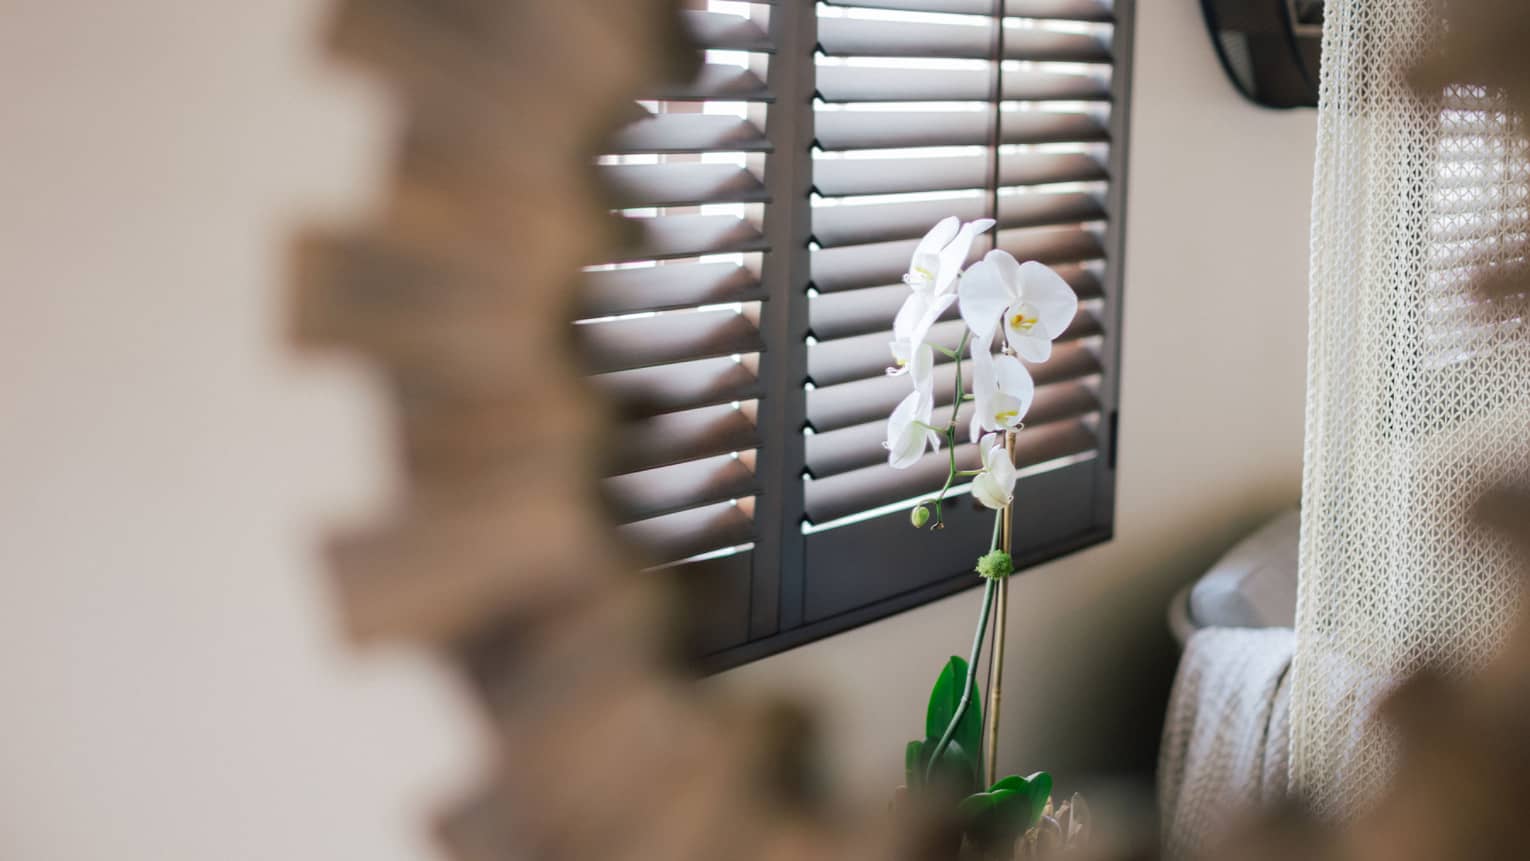 A mirror showing flowers by a window.